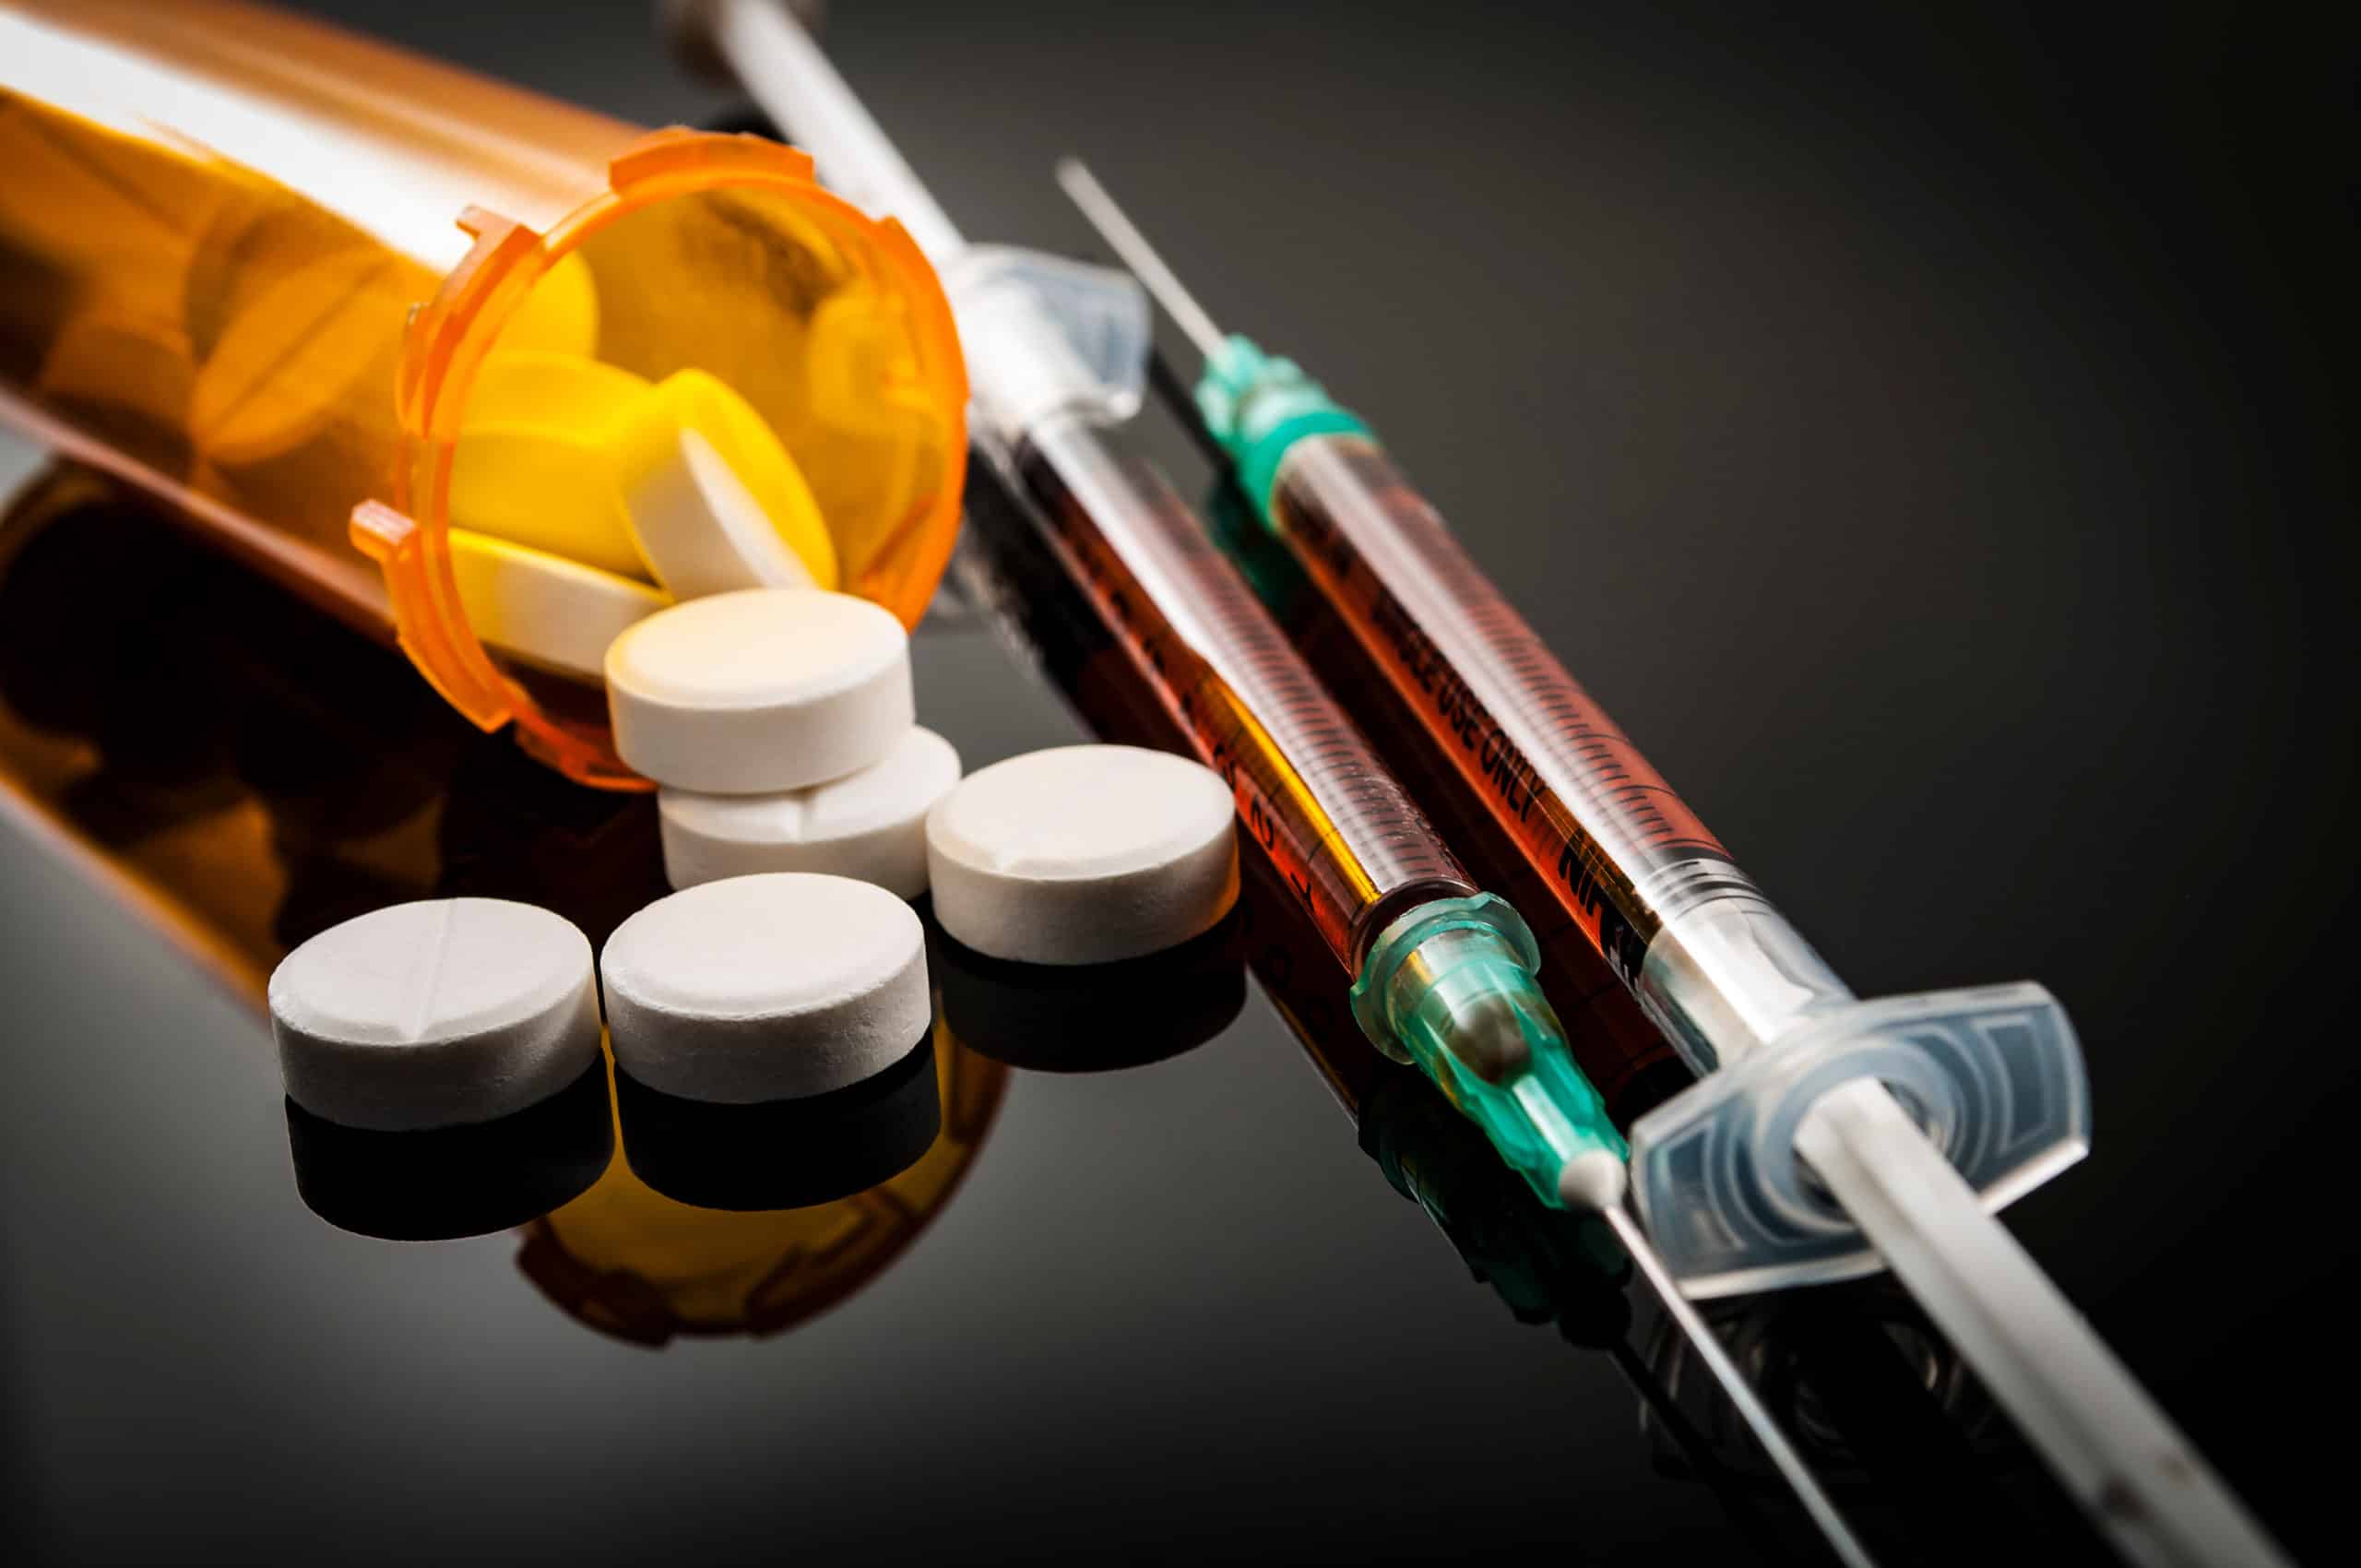 Opioids are a class of dangerous and addictive drugs. Learn more about the difference between opioids and opiates and the signs of use.